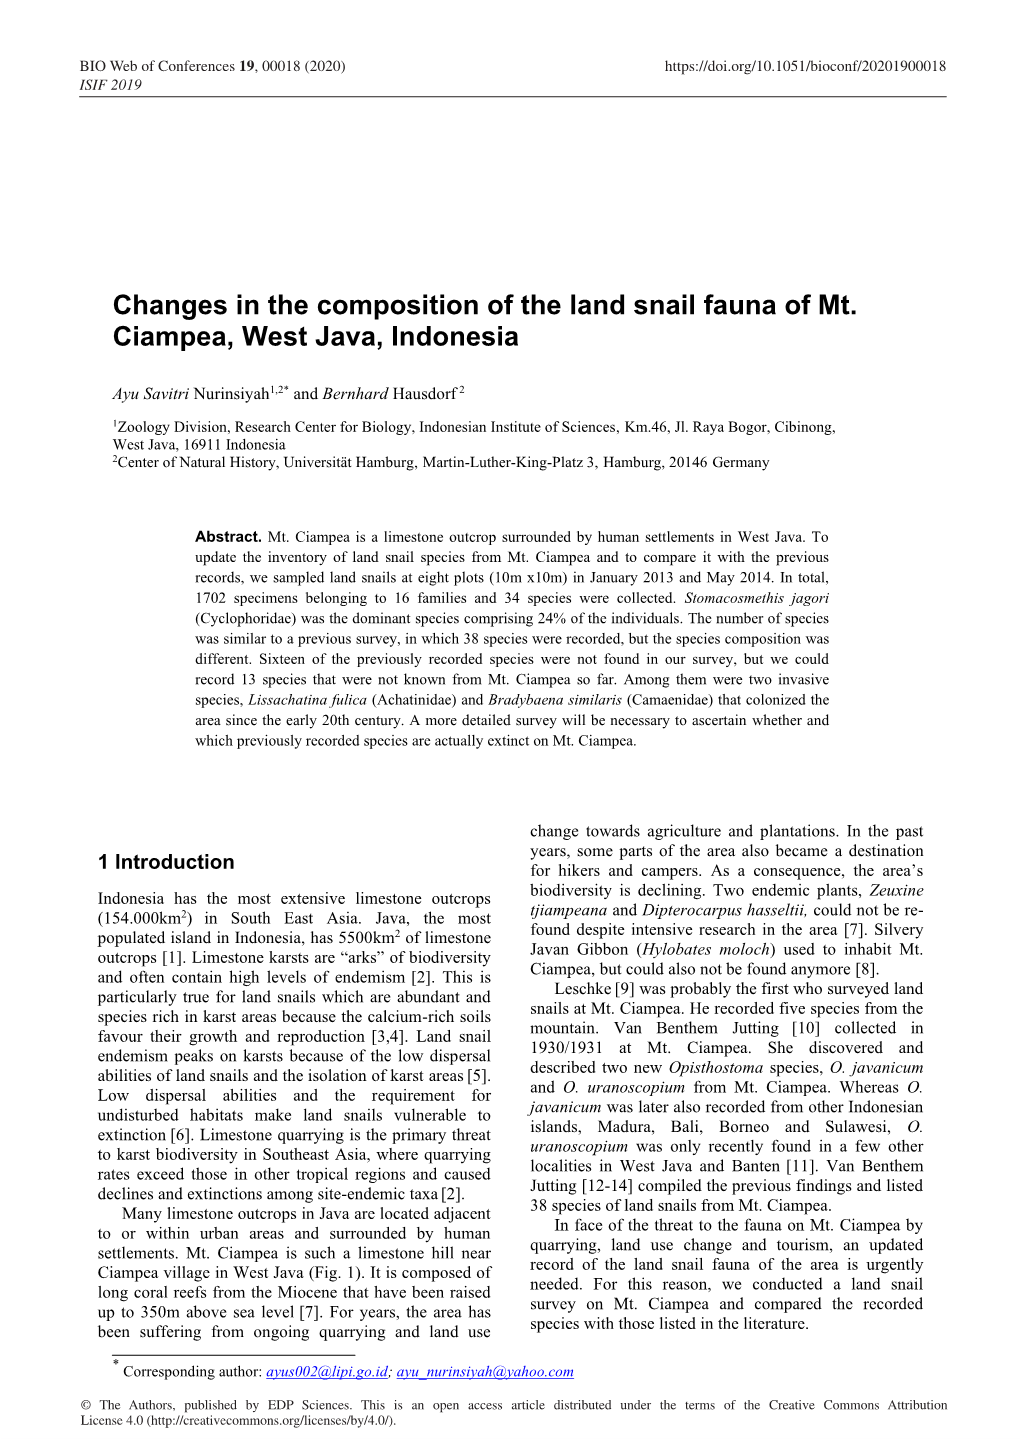 Changes in the Composition of the Land Snail Fauna of Mt. Ciampea, West Java, Indonesia